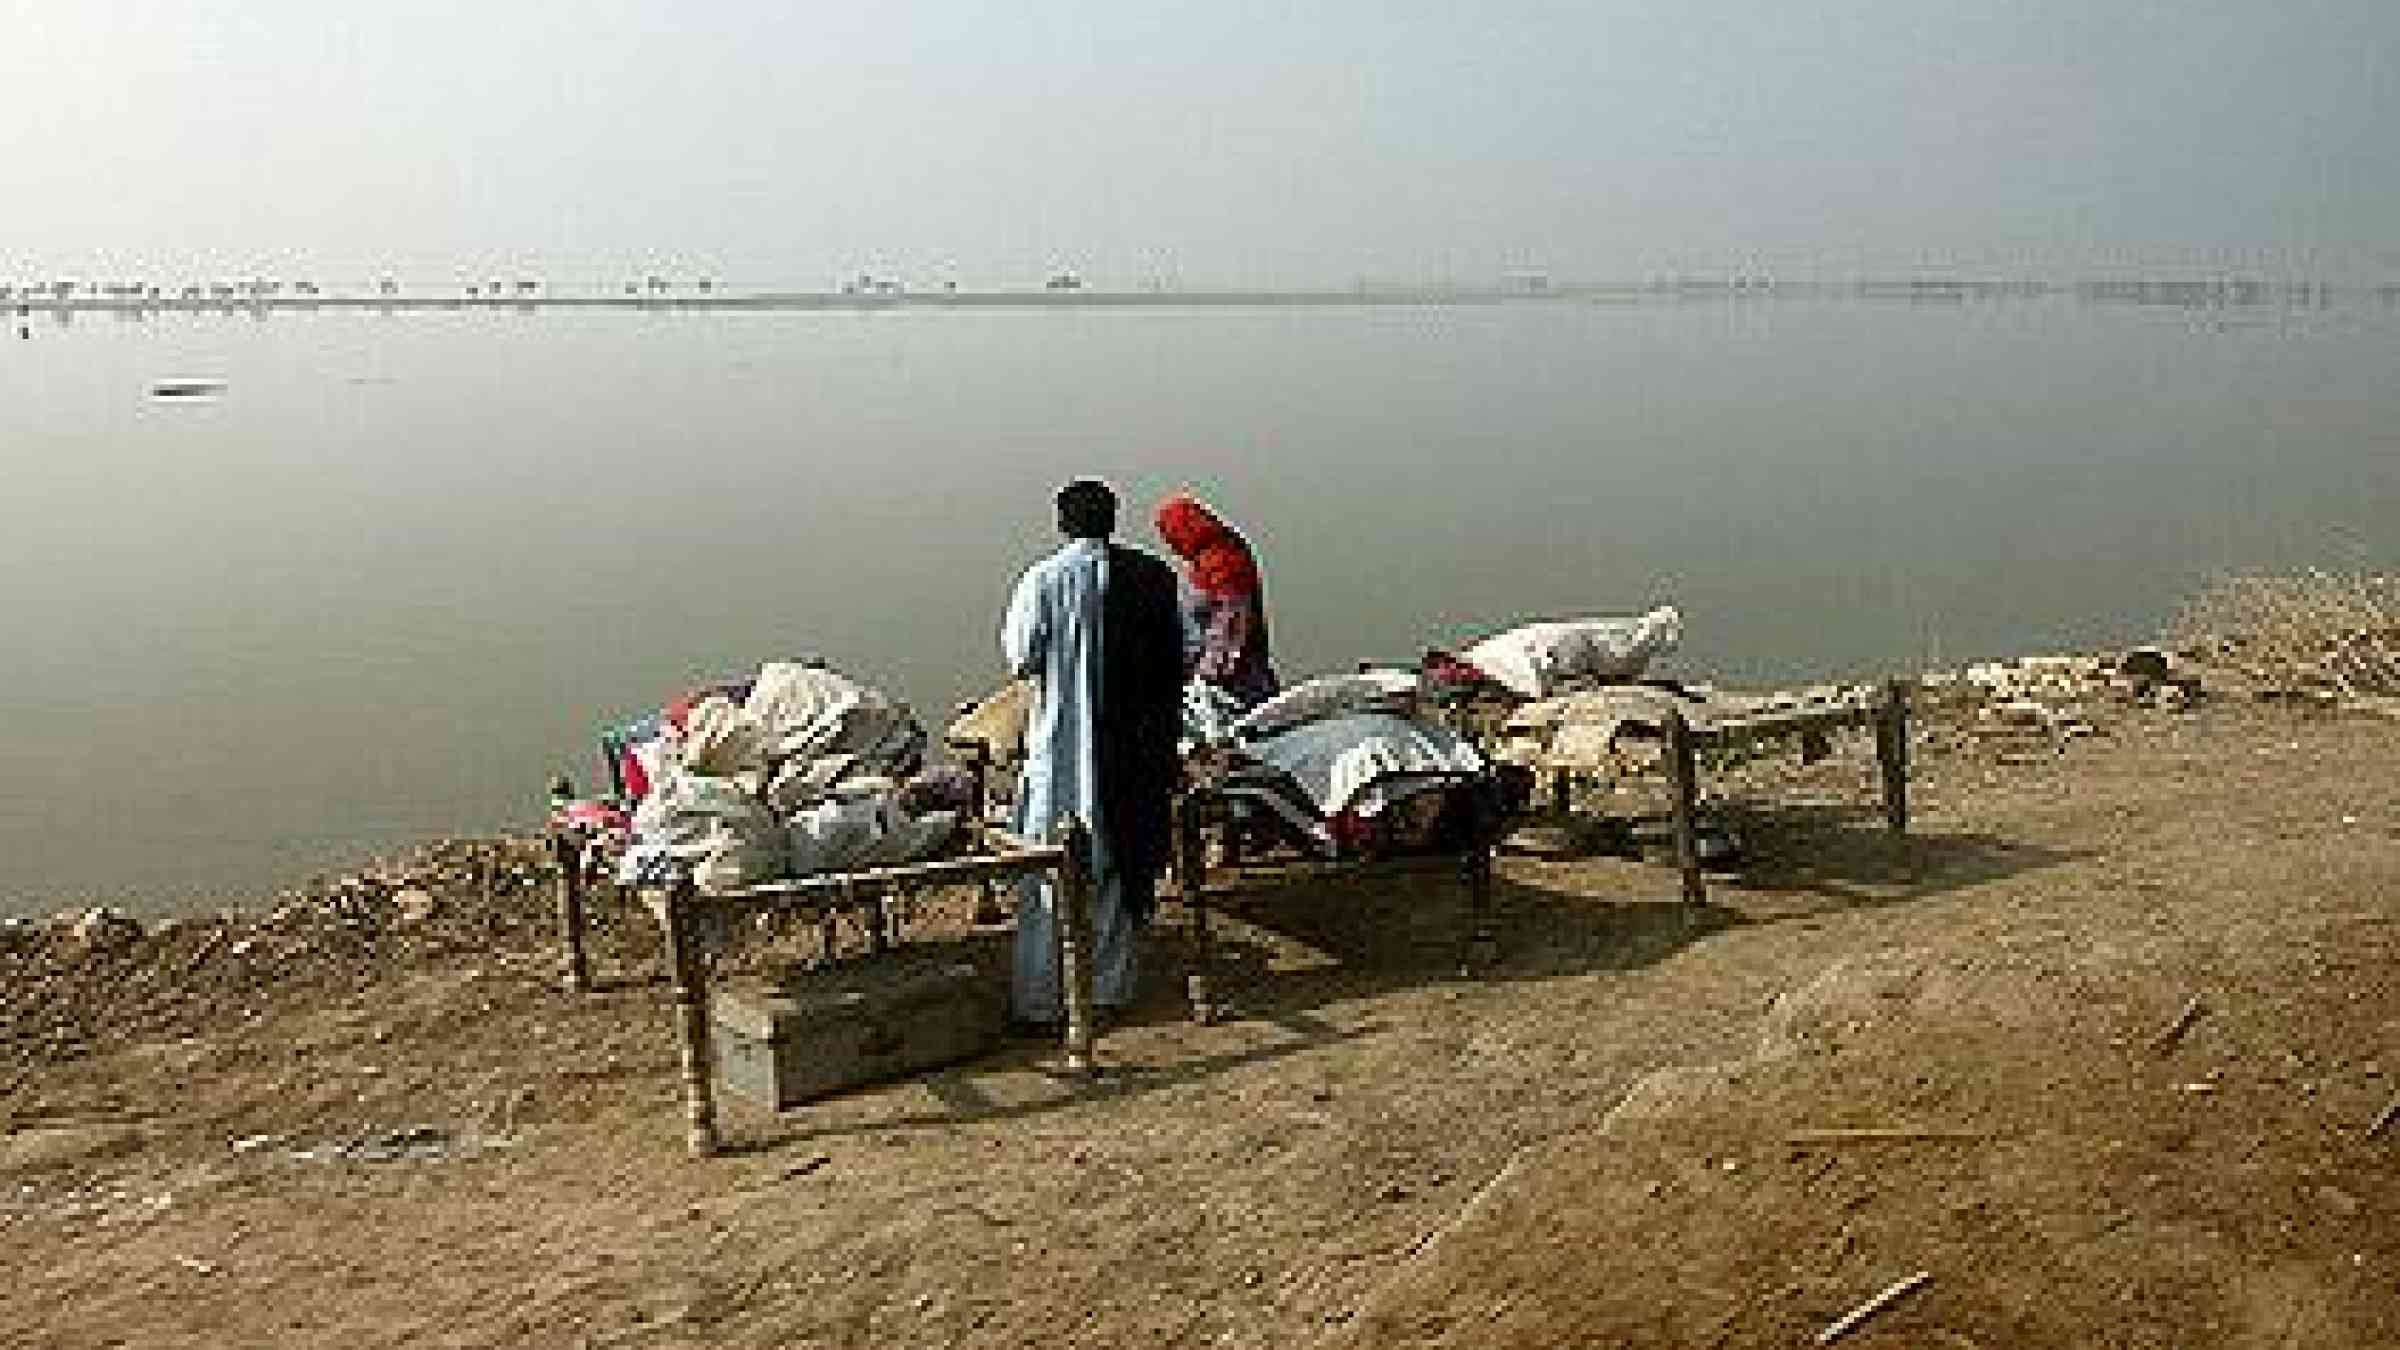 Families returning to their communities following the flooding in Pakistan are often being forced to camp by the roadside, as the flood waters have still not receded sufficiently for them to return to their homes.  Image: DFID/Russell Watkins